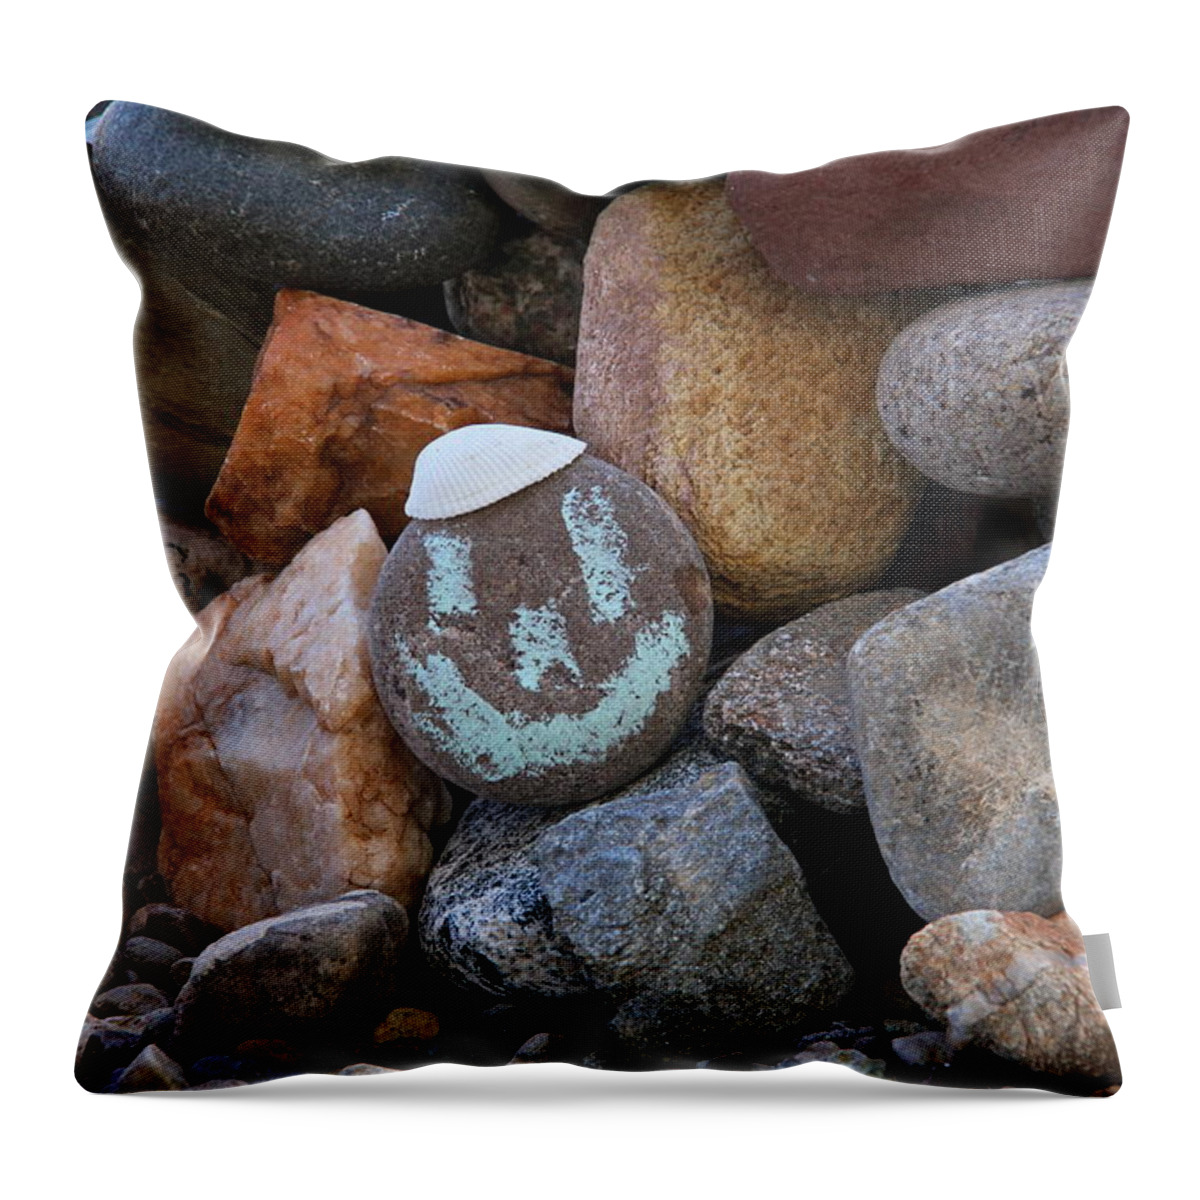 Rockes Throw Pillow featuring the photograph Memories by Suzanne Oesterling